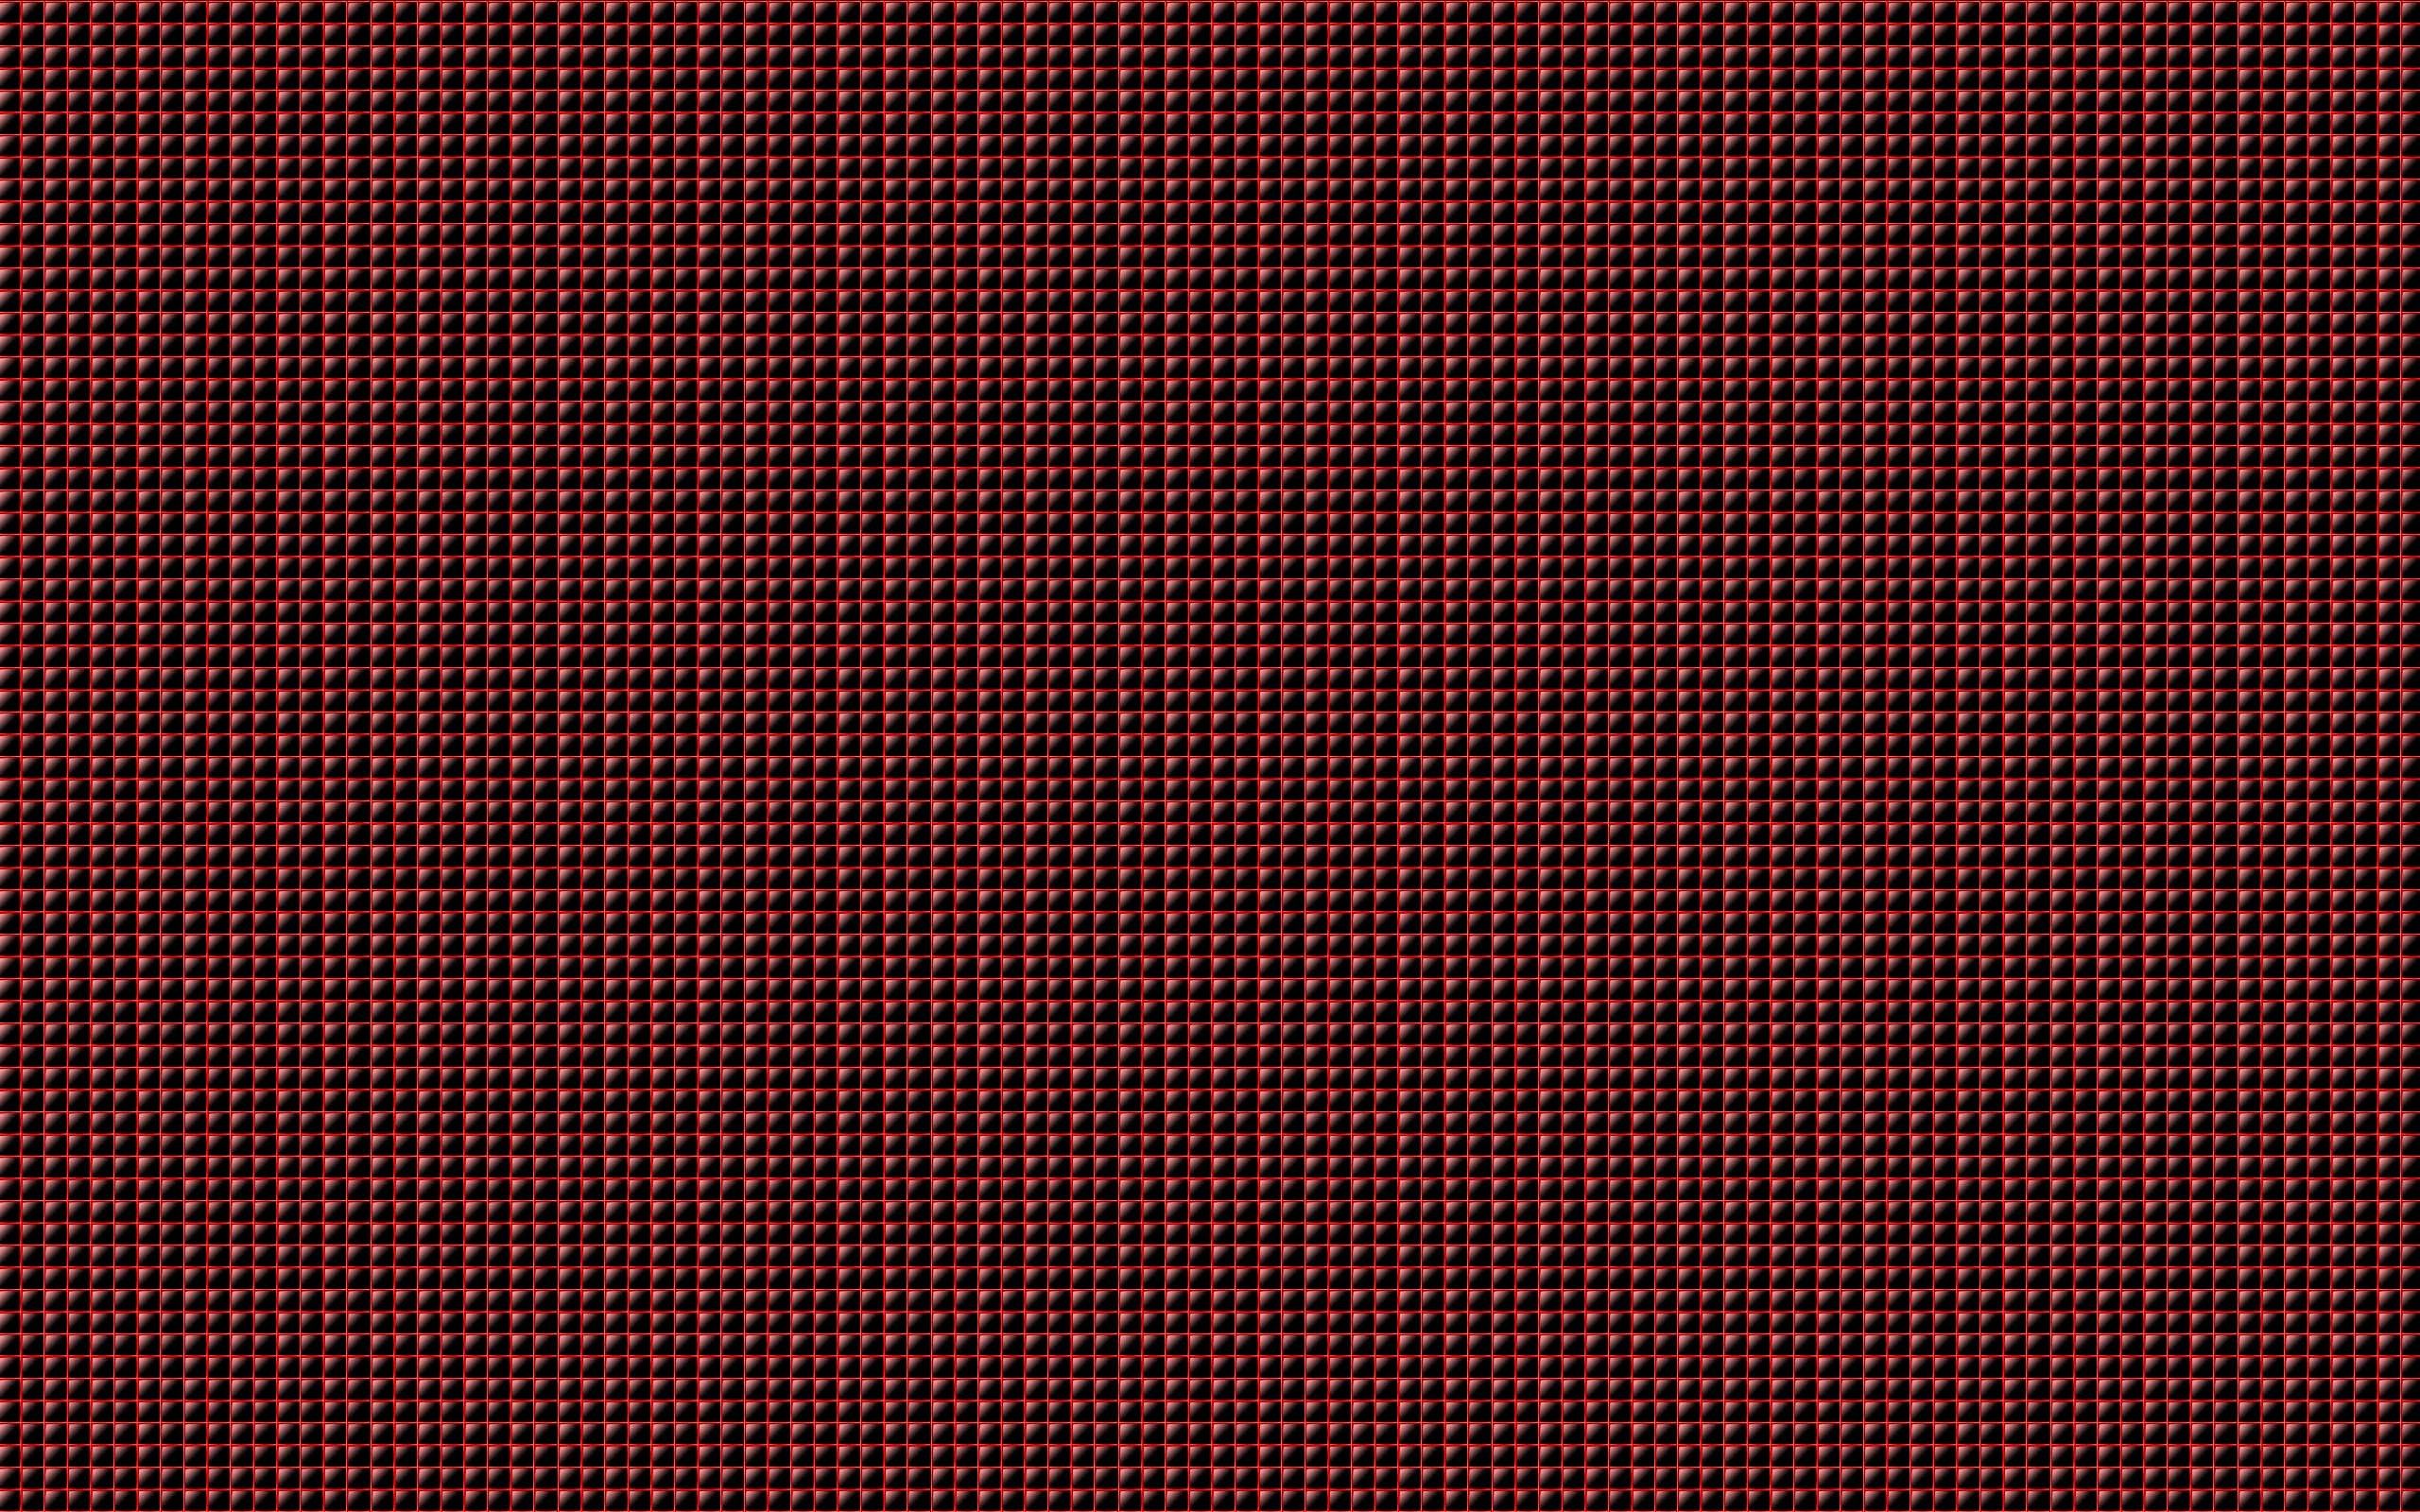 Red Aesthetic Wallpapers Hd High Quality Pixelstalk Net